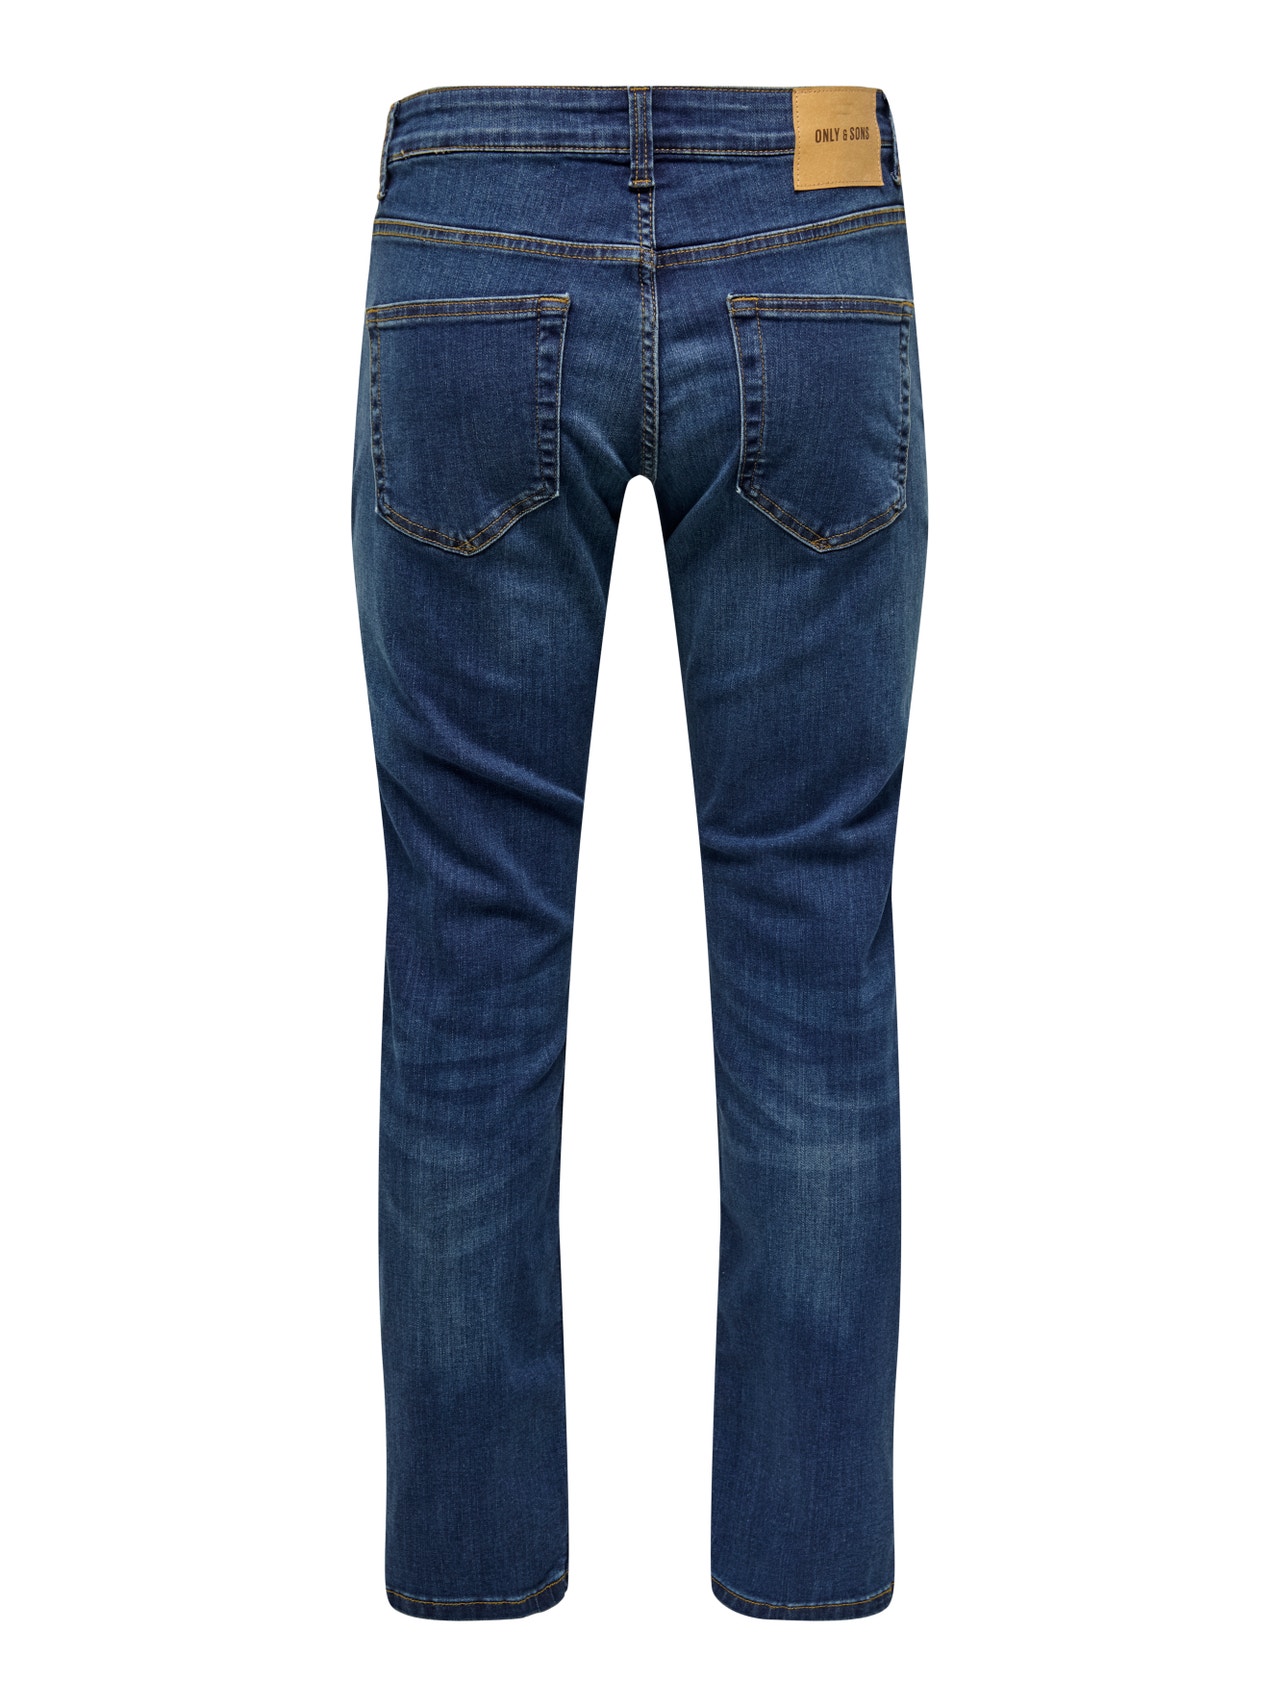 ONLY & SONS Jeans Regular Fit Taille moyenne -Medium Blue Denim - 22005076